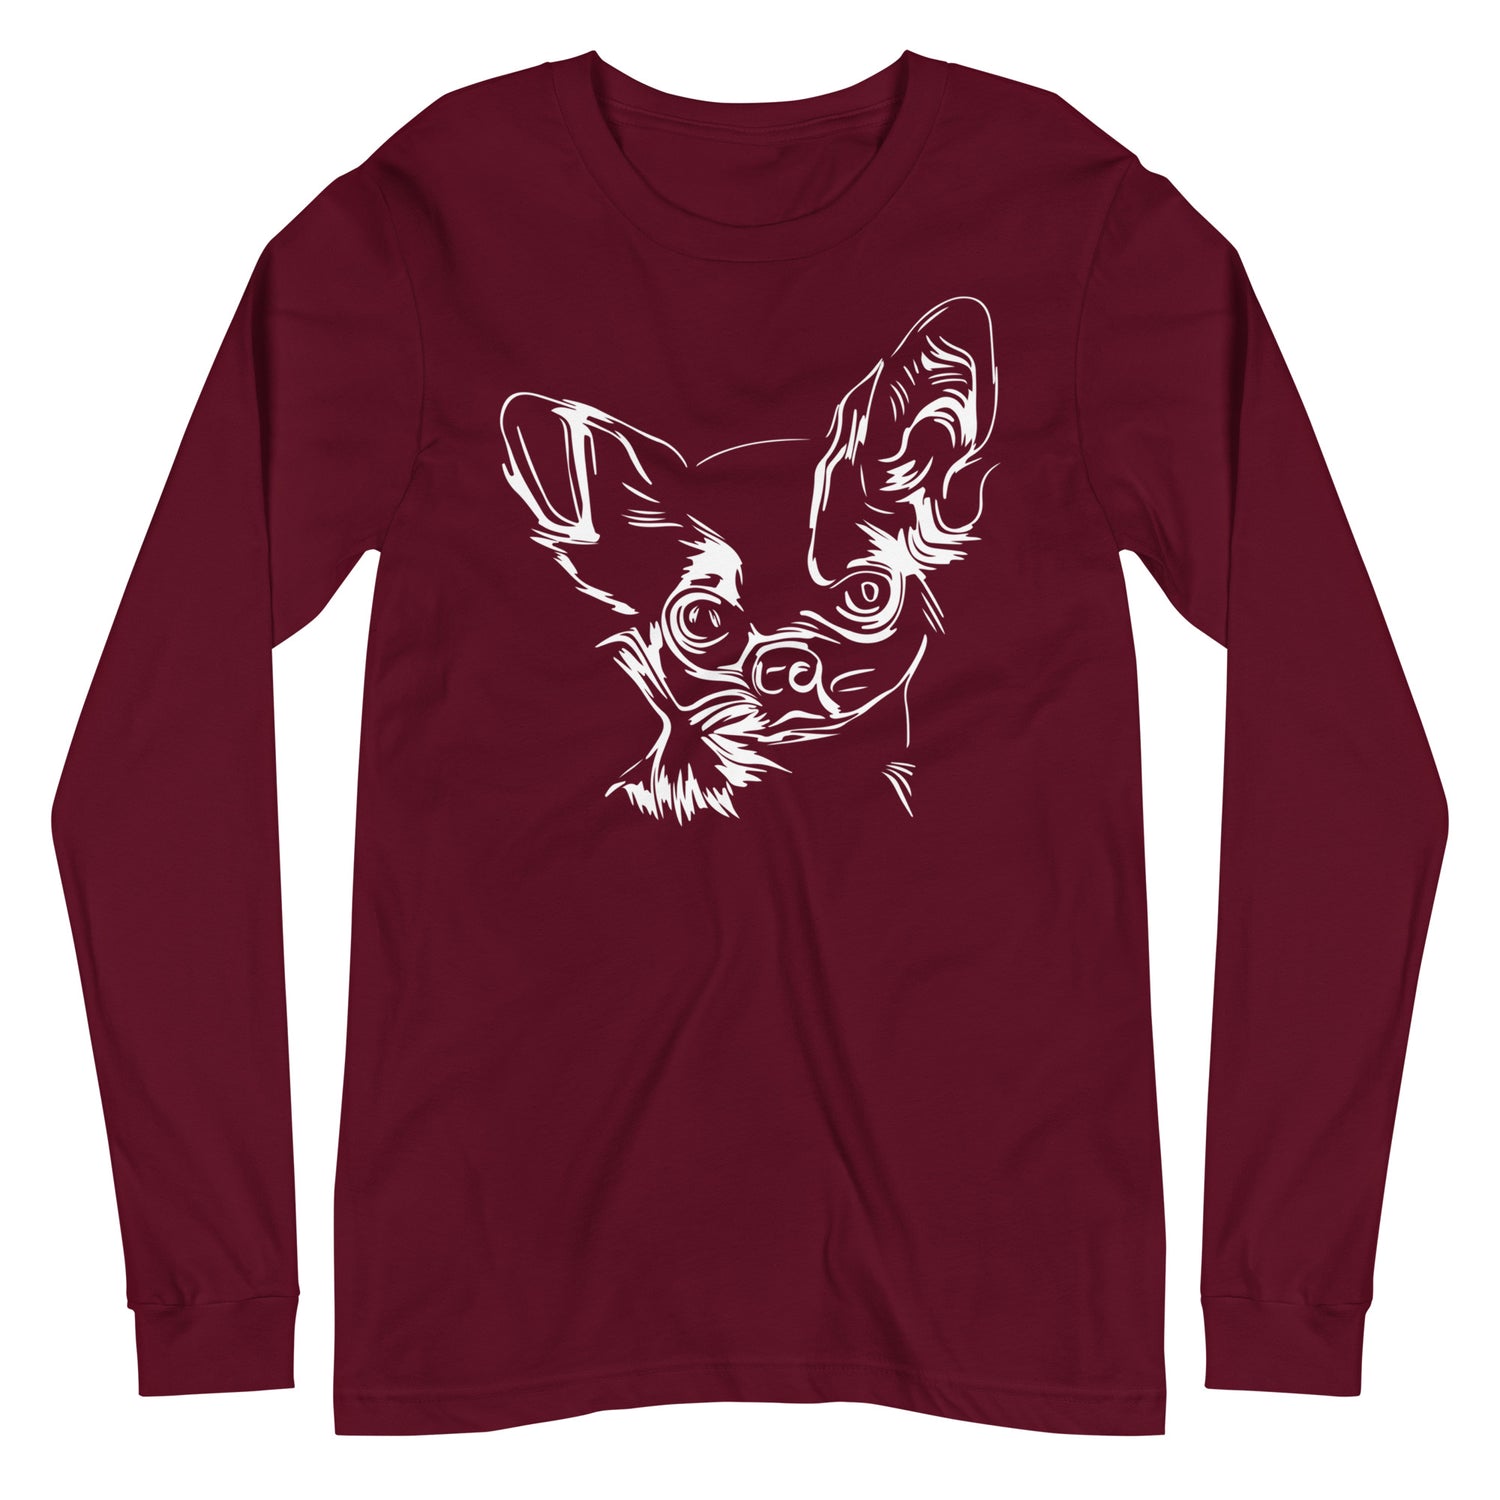 White line Chihuahua face on unisex maroon long sleeve t-shirt